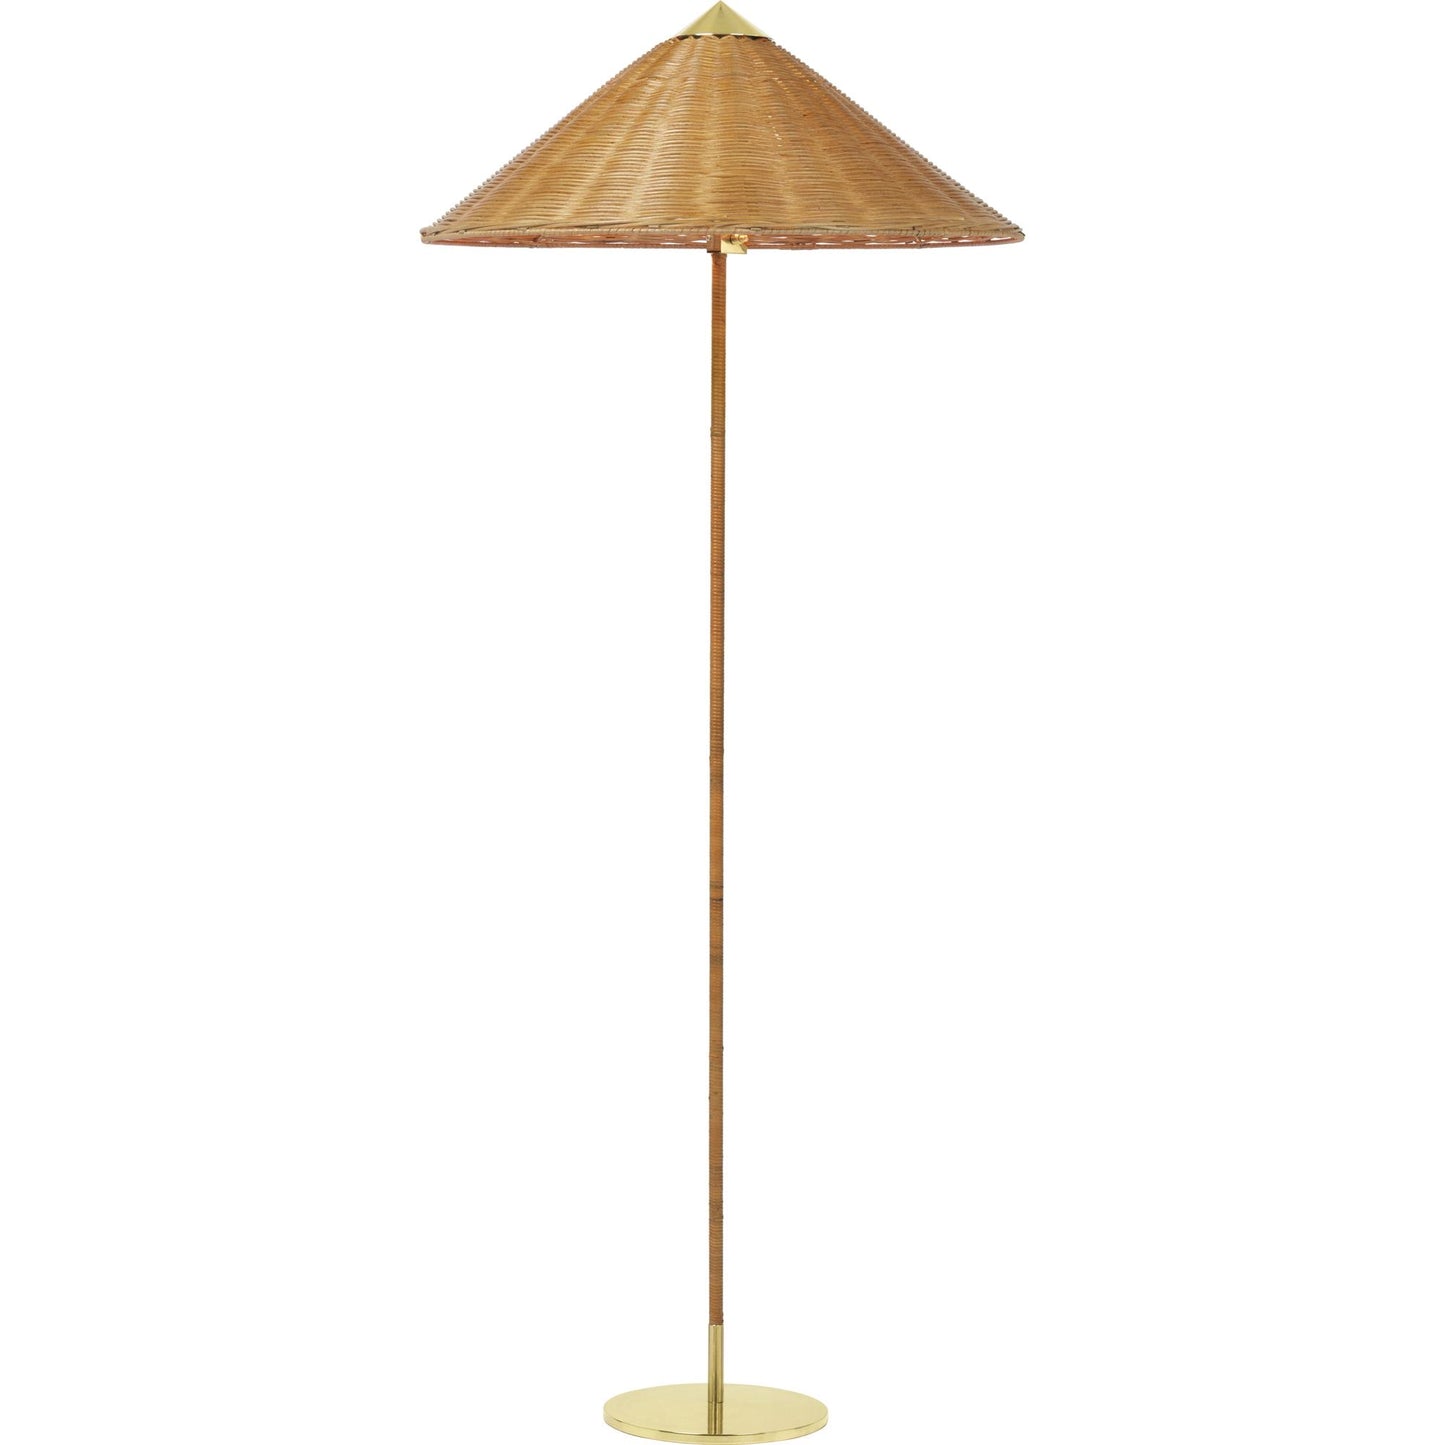 Tynell Collection 9602 Floor Lamp by GUBI #Wickerwork